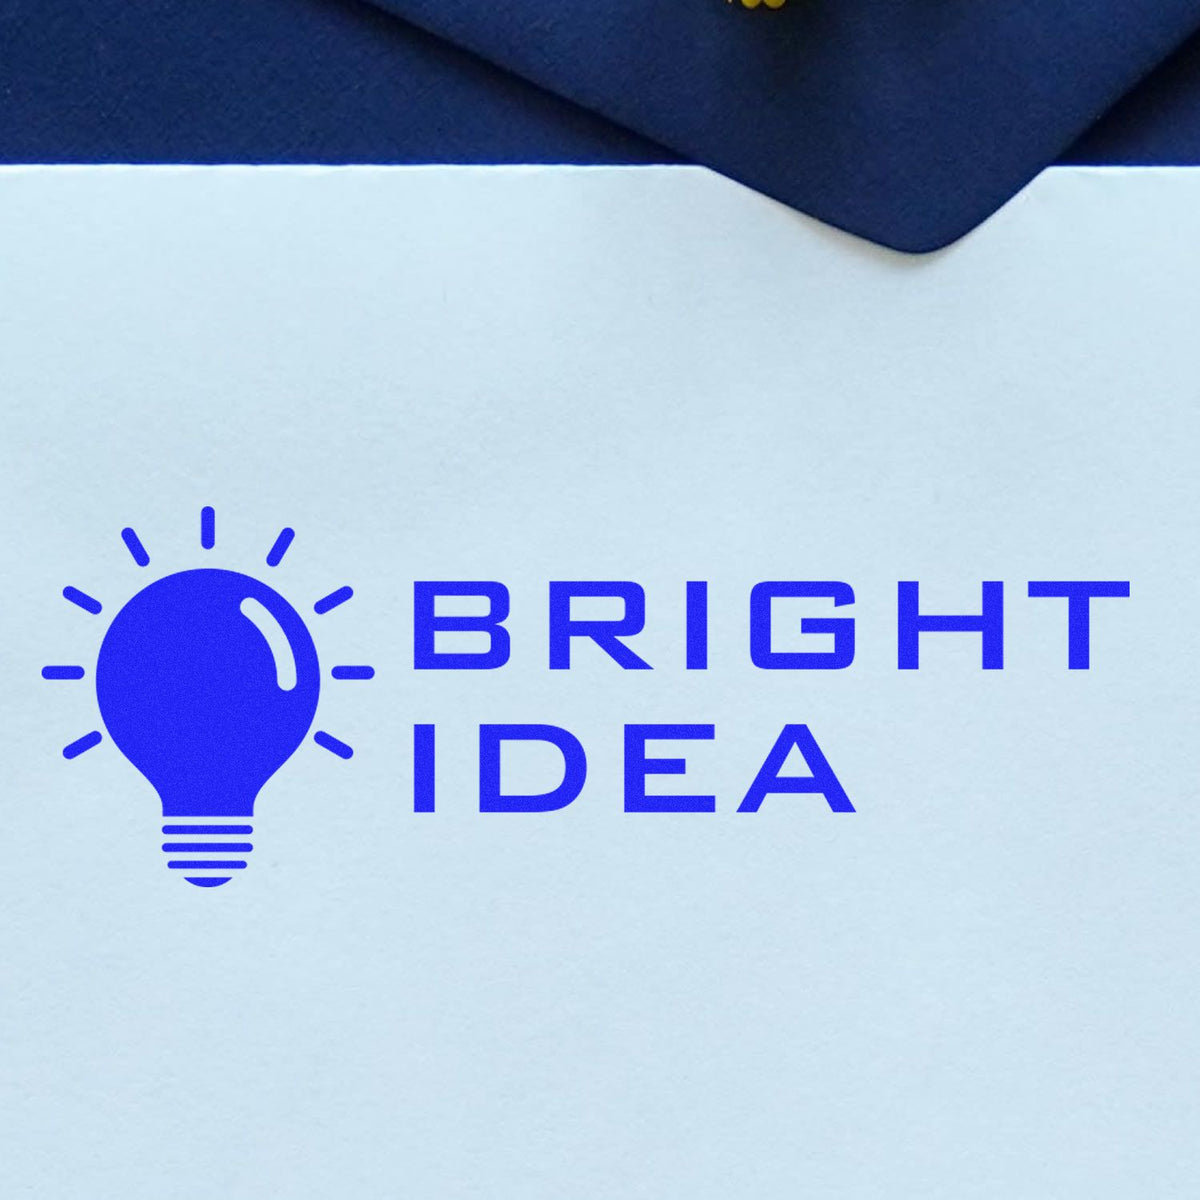 Large Self-Inking Bright Idea Stamp In Use Photo